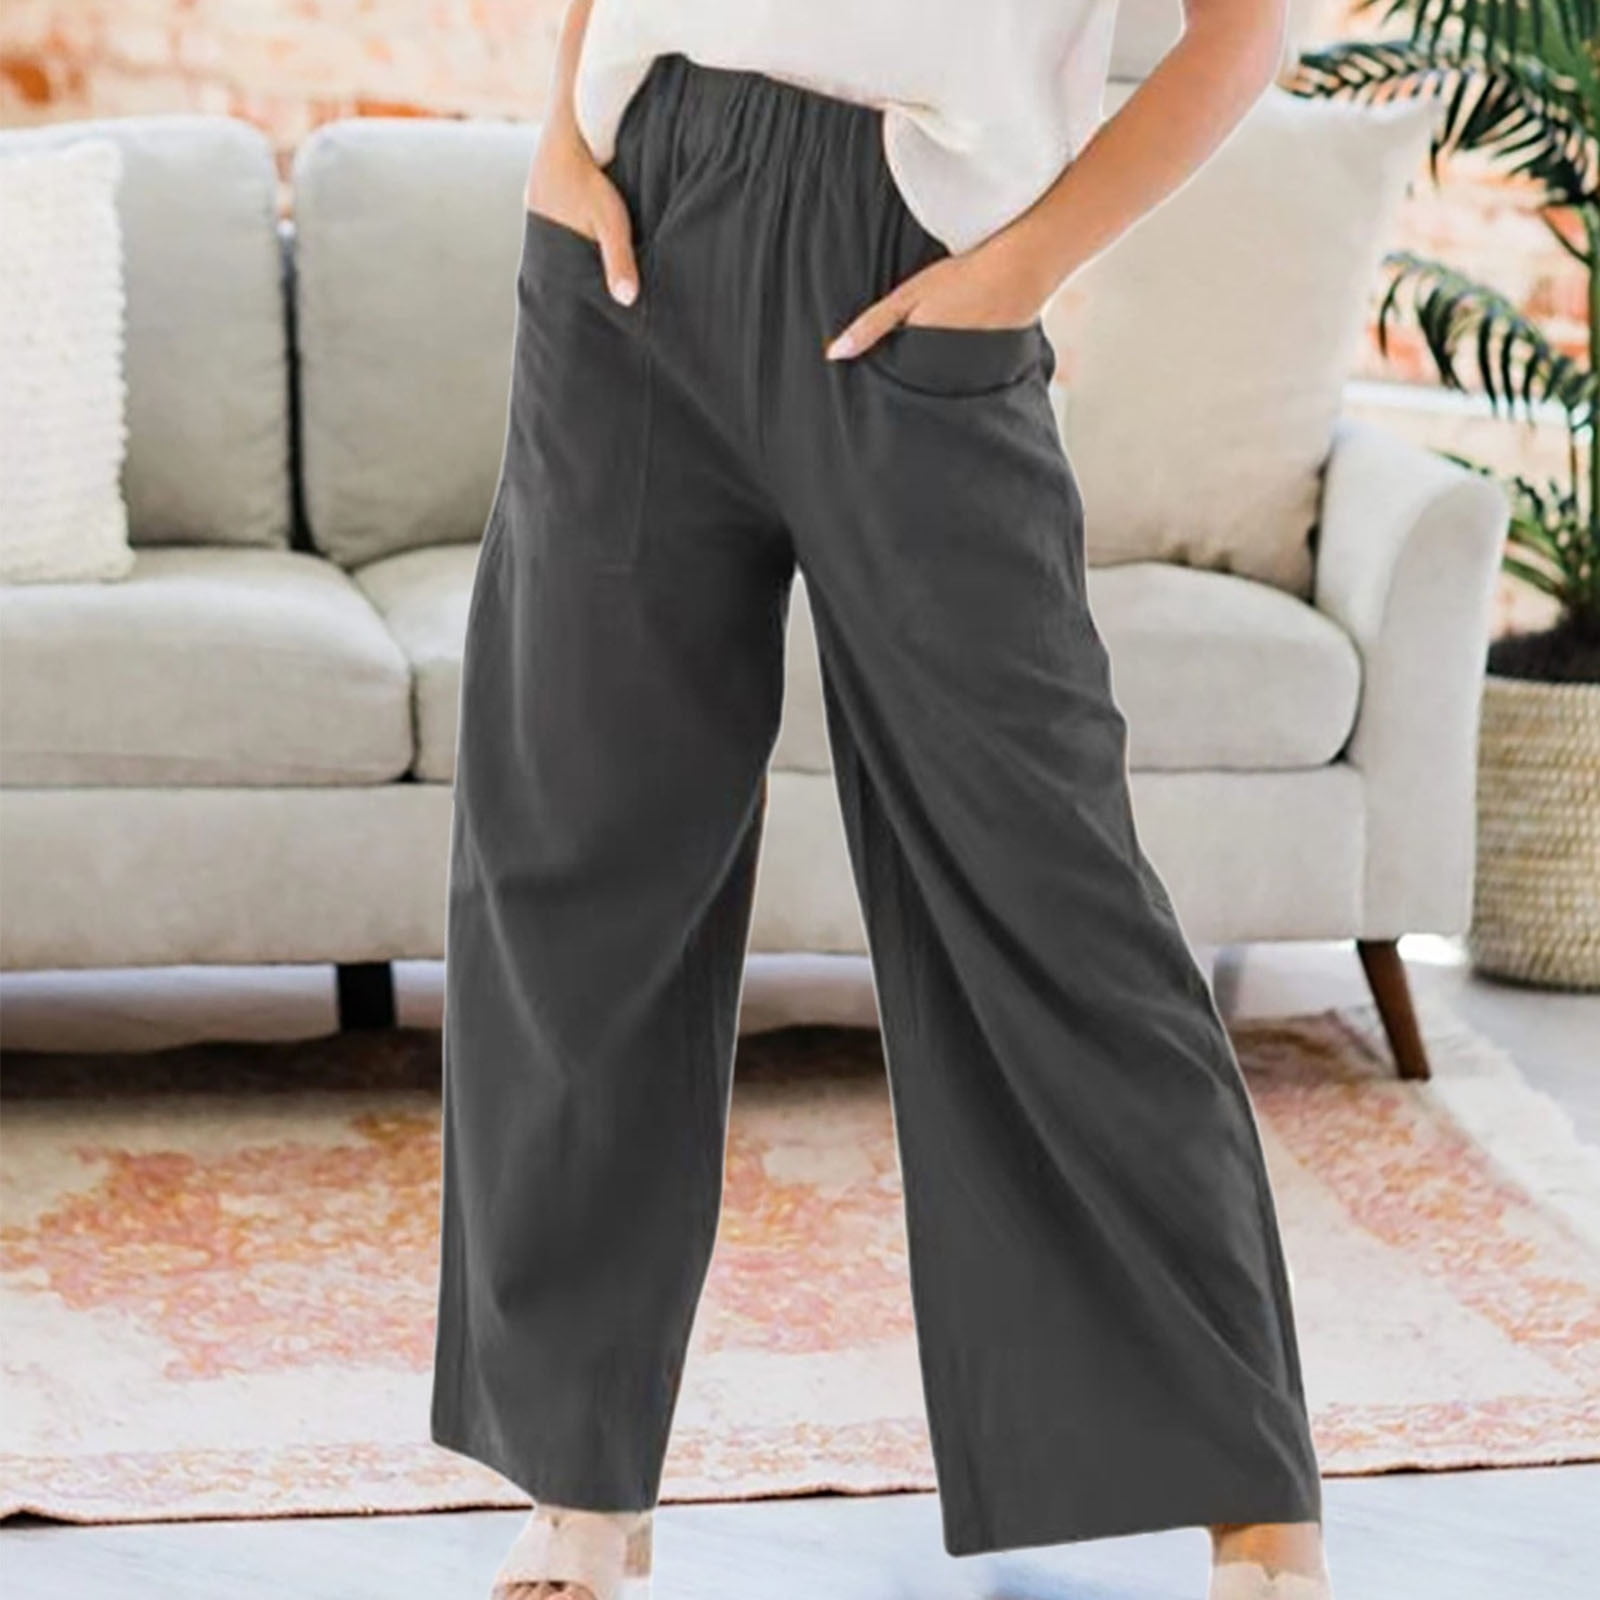 The cargo pants trend is making a triumphant return - Her World Singapore